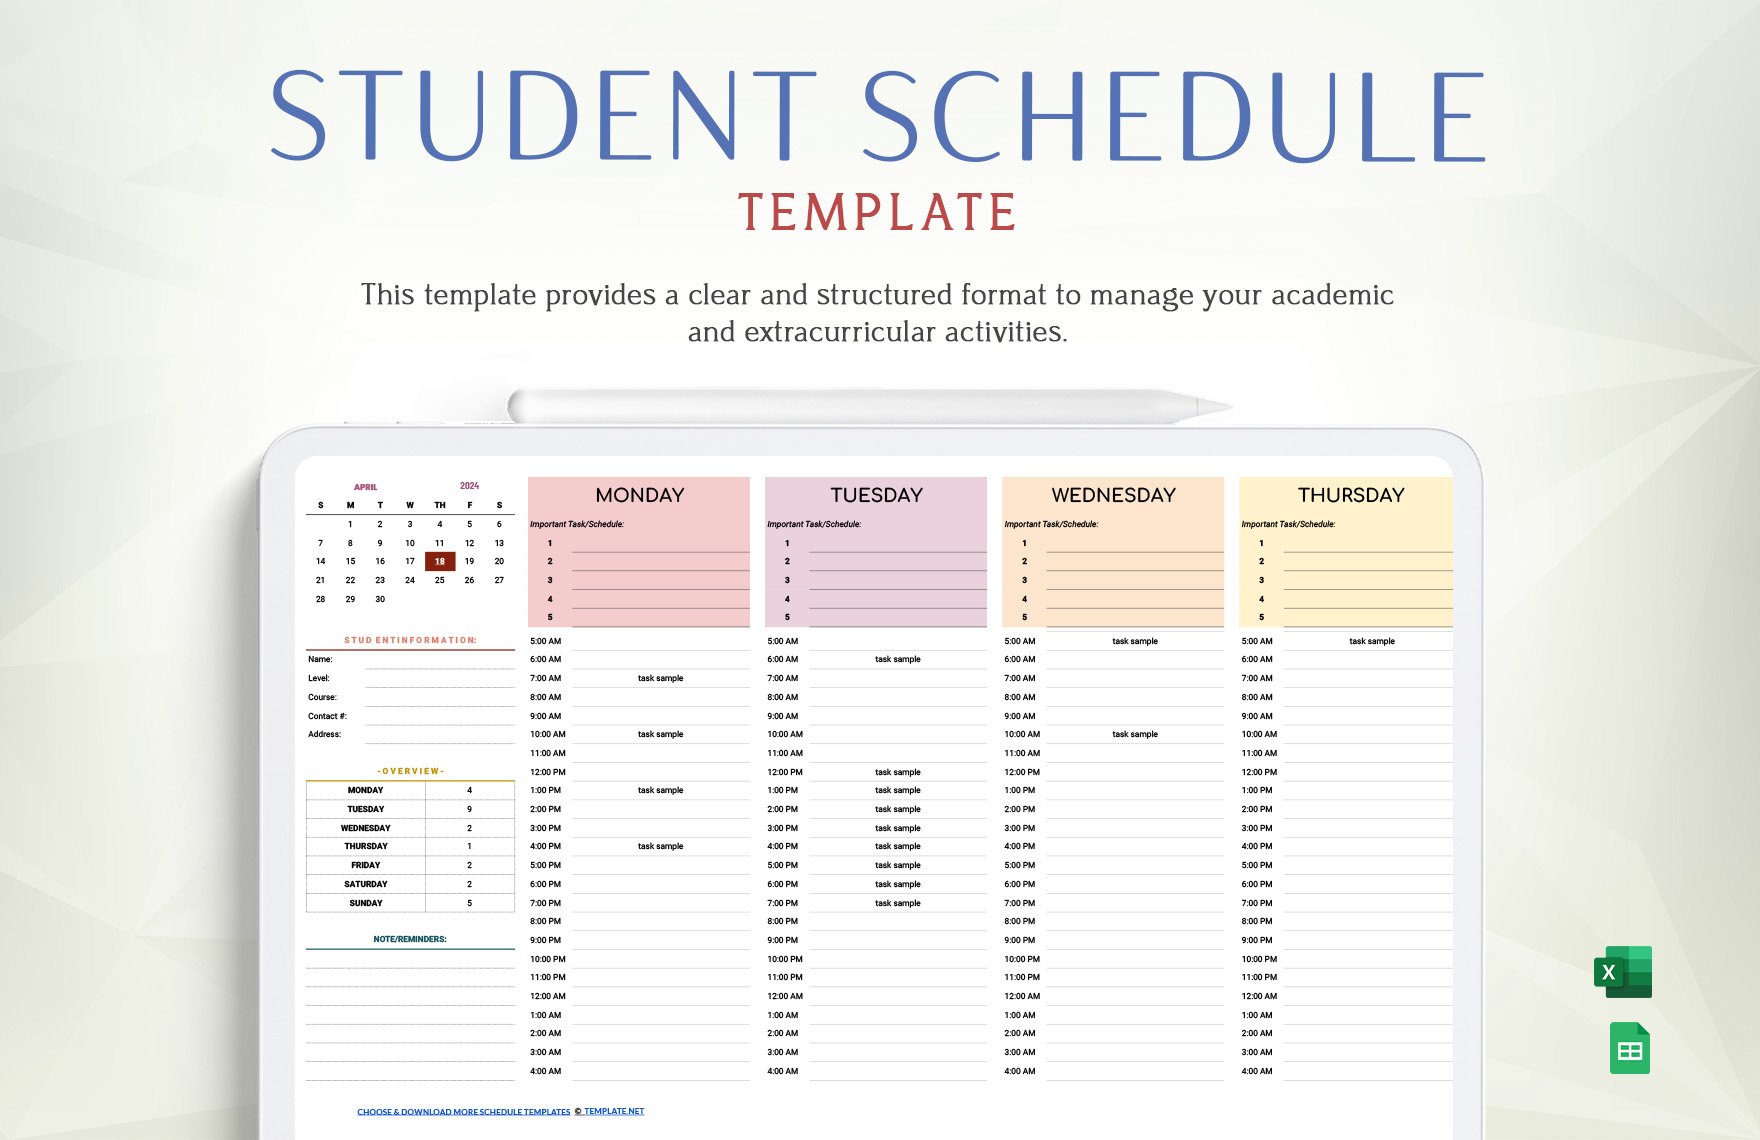 Free Student Schedule Template in Excel, Google Sheets